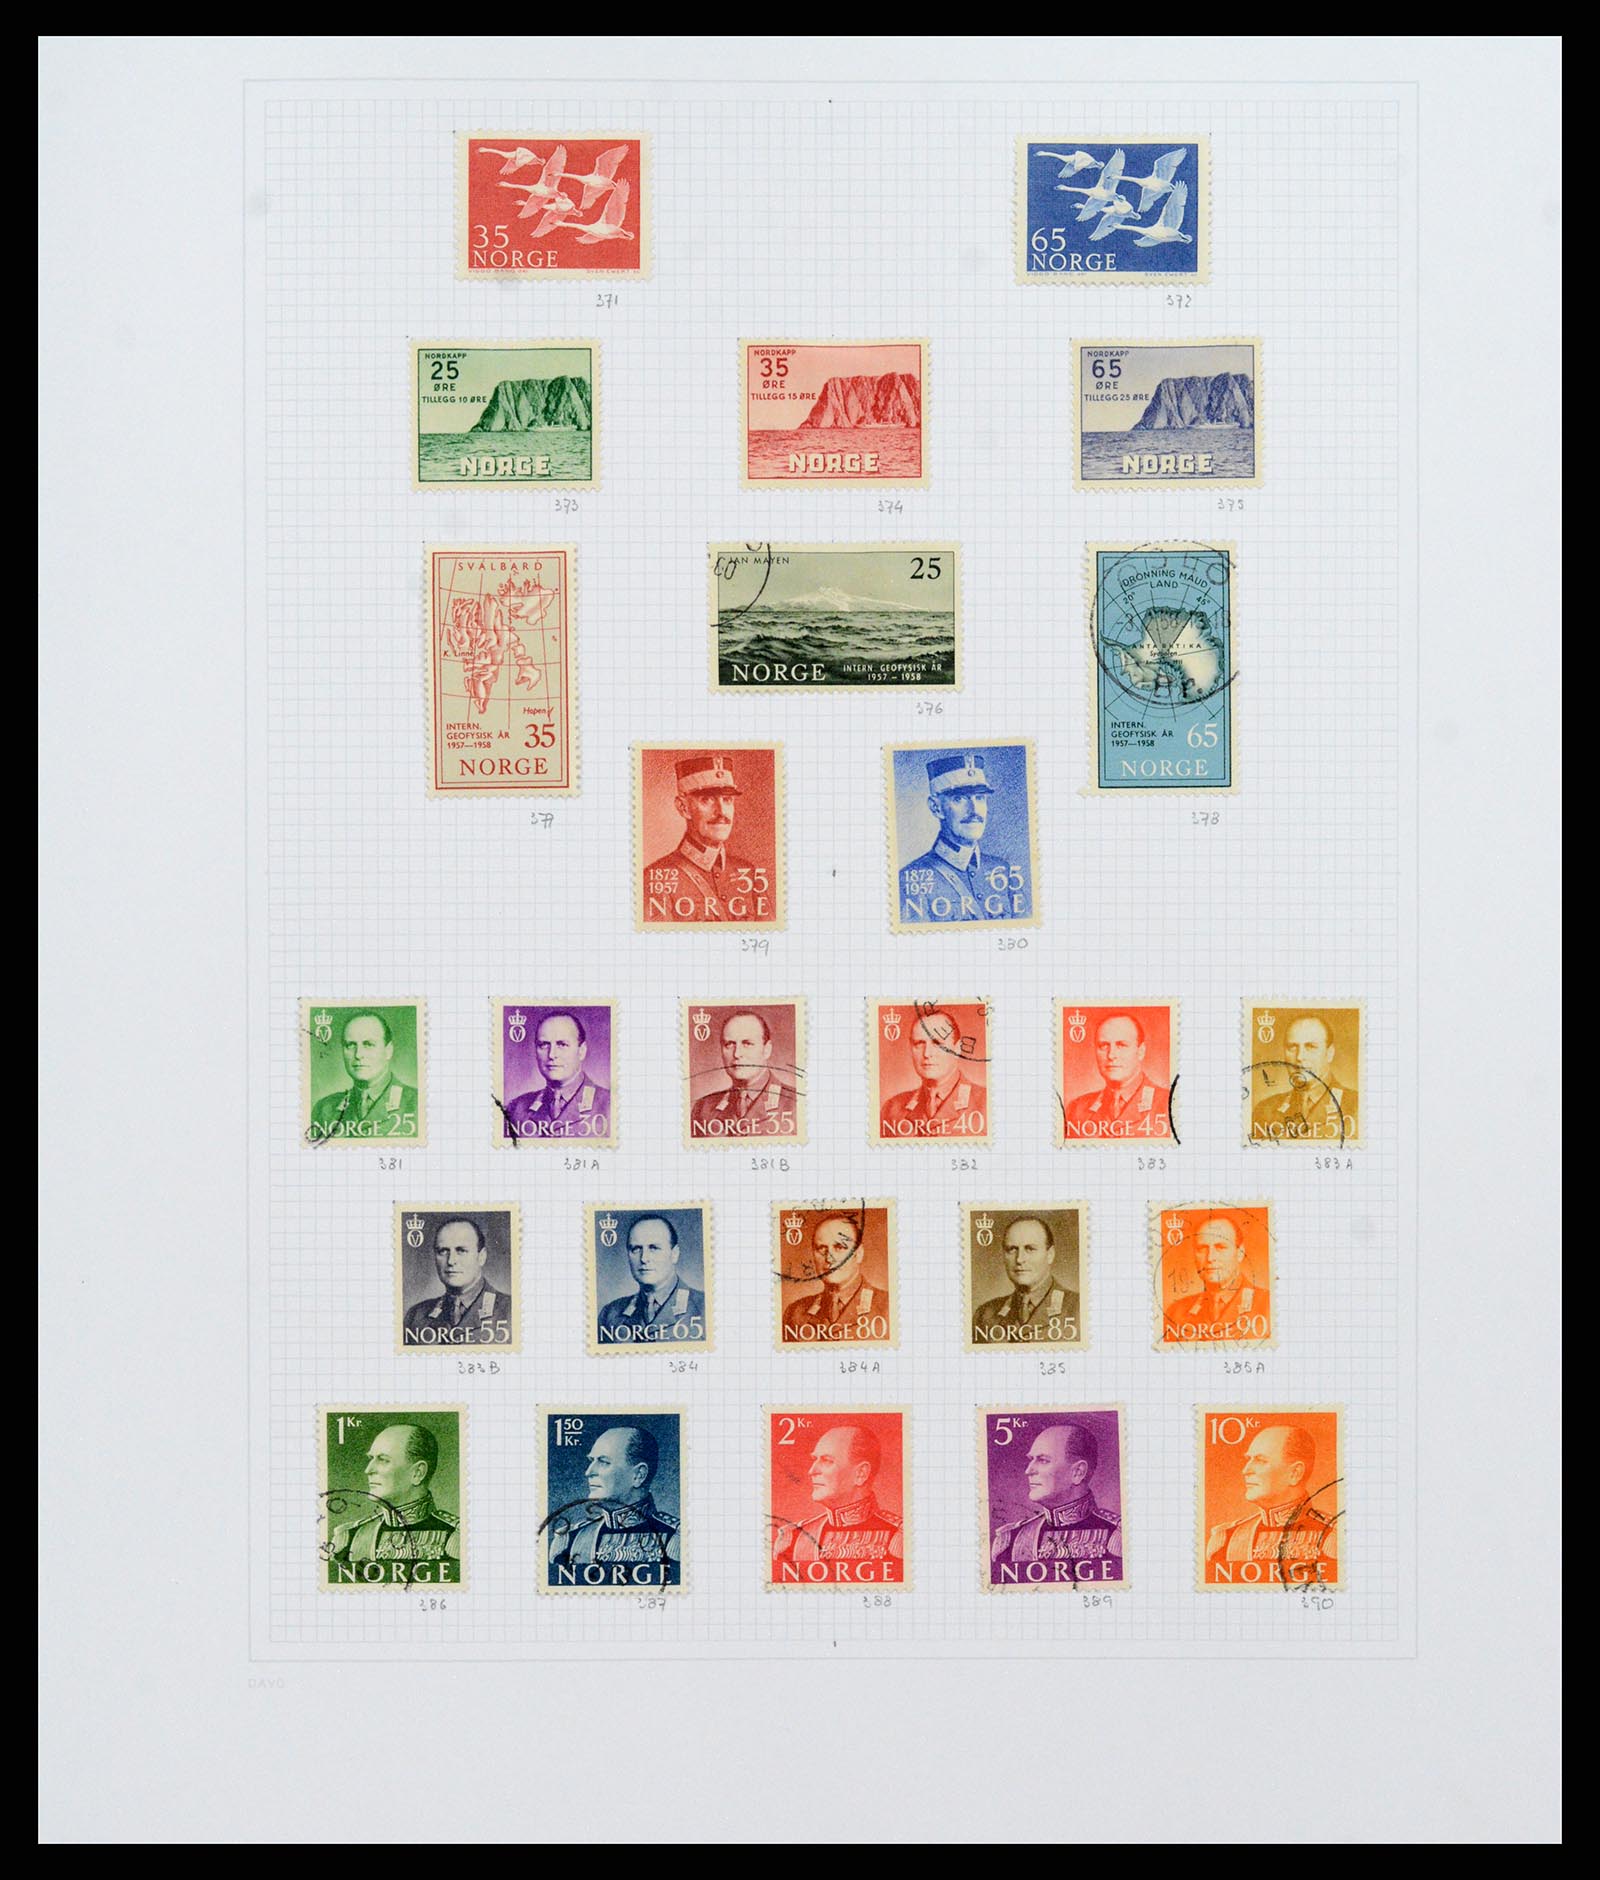 38171 0014 - Stamp collection 38171 Norway 1856-2015.